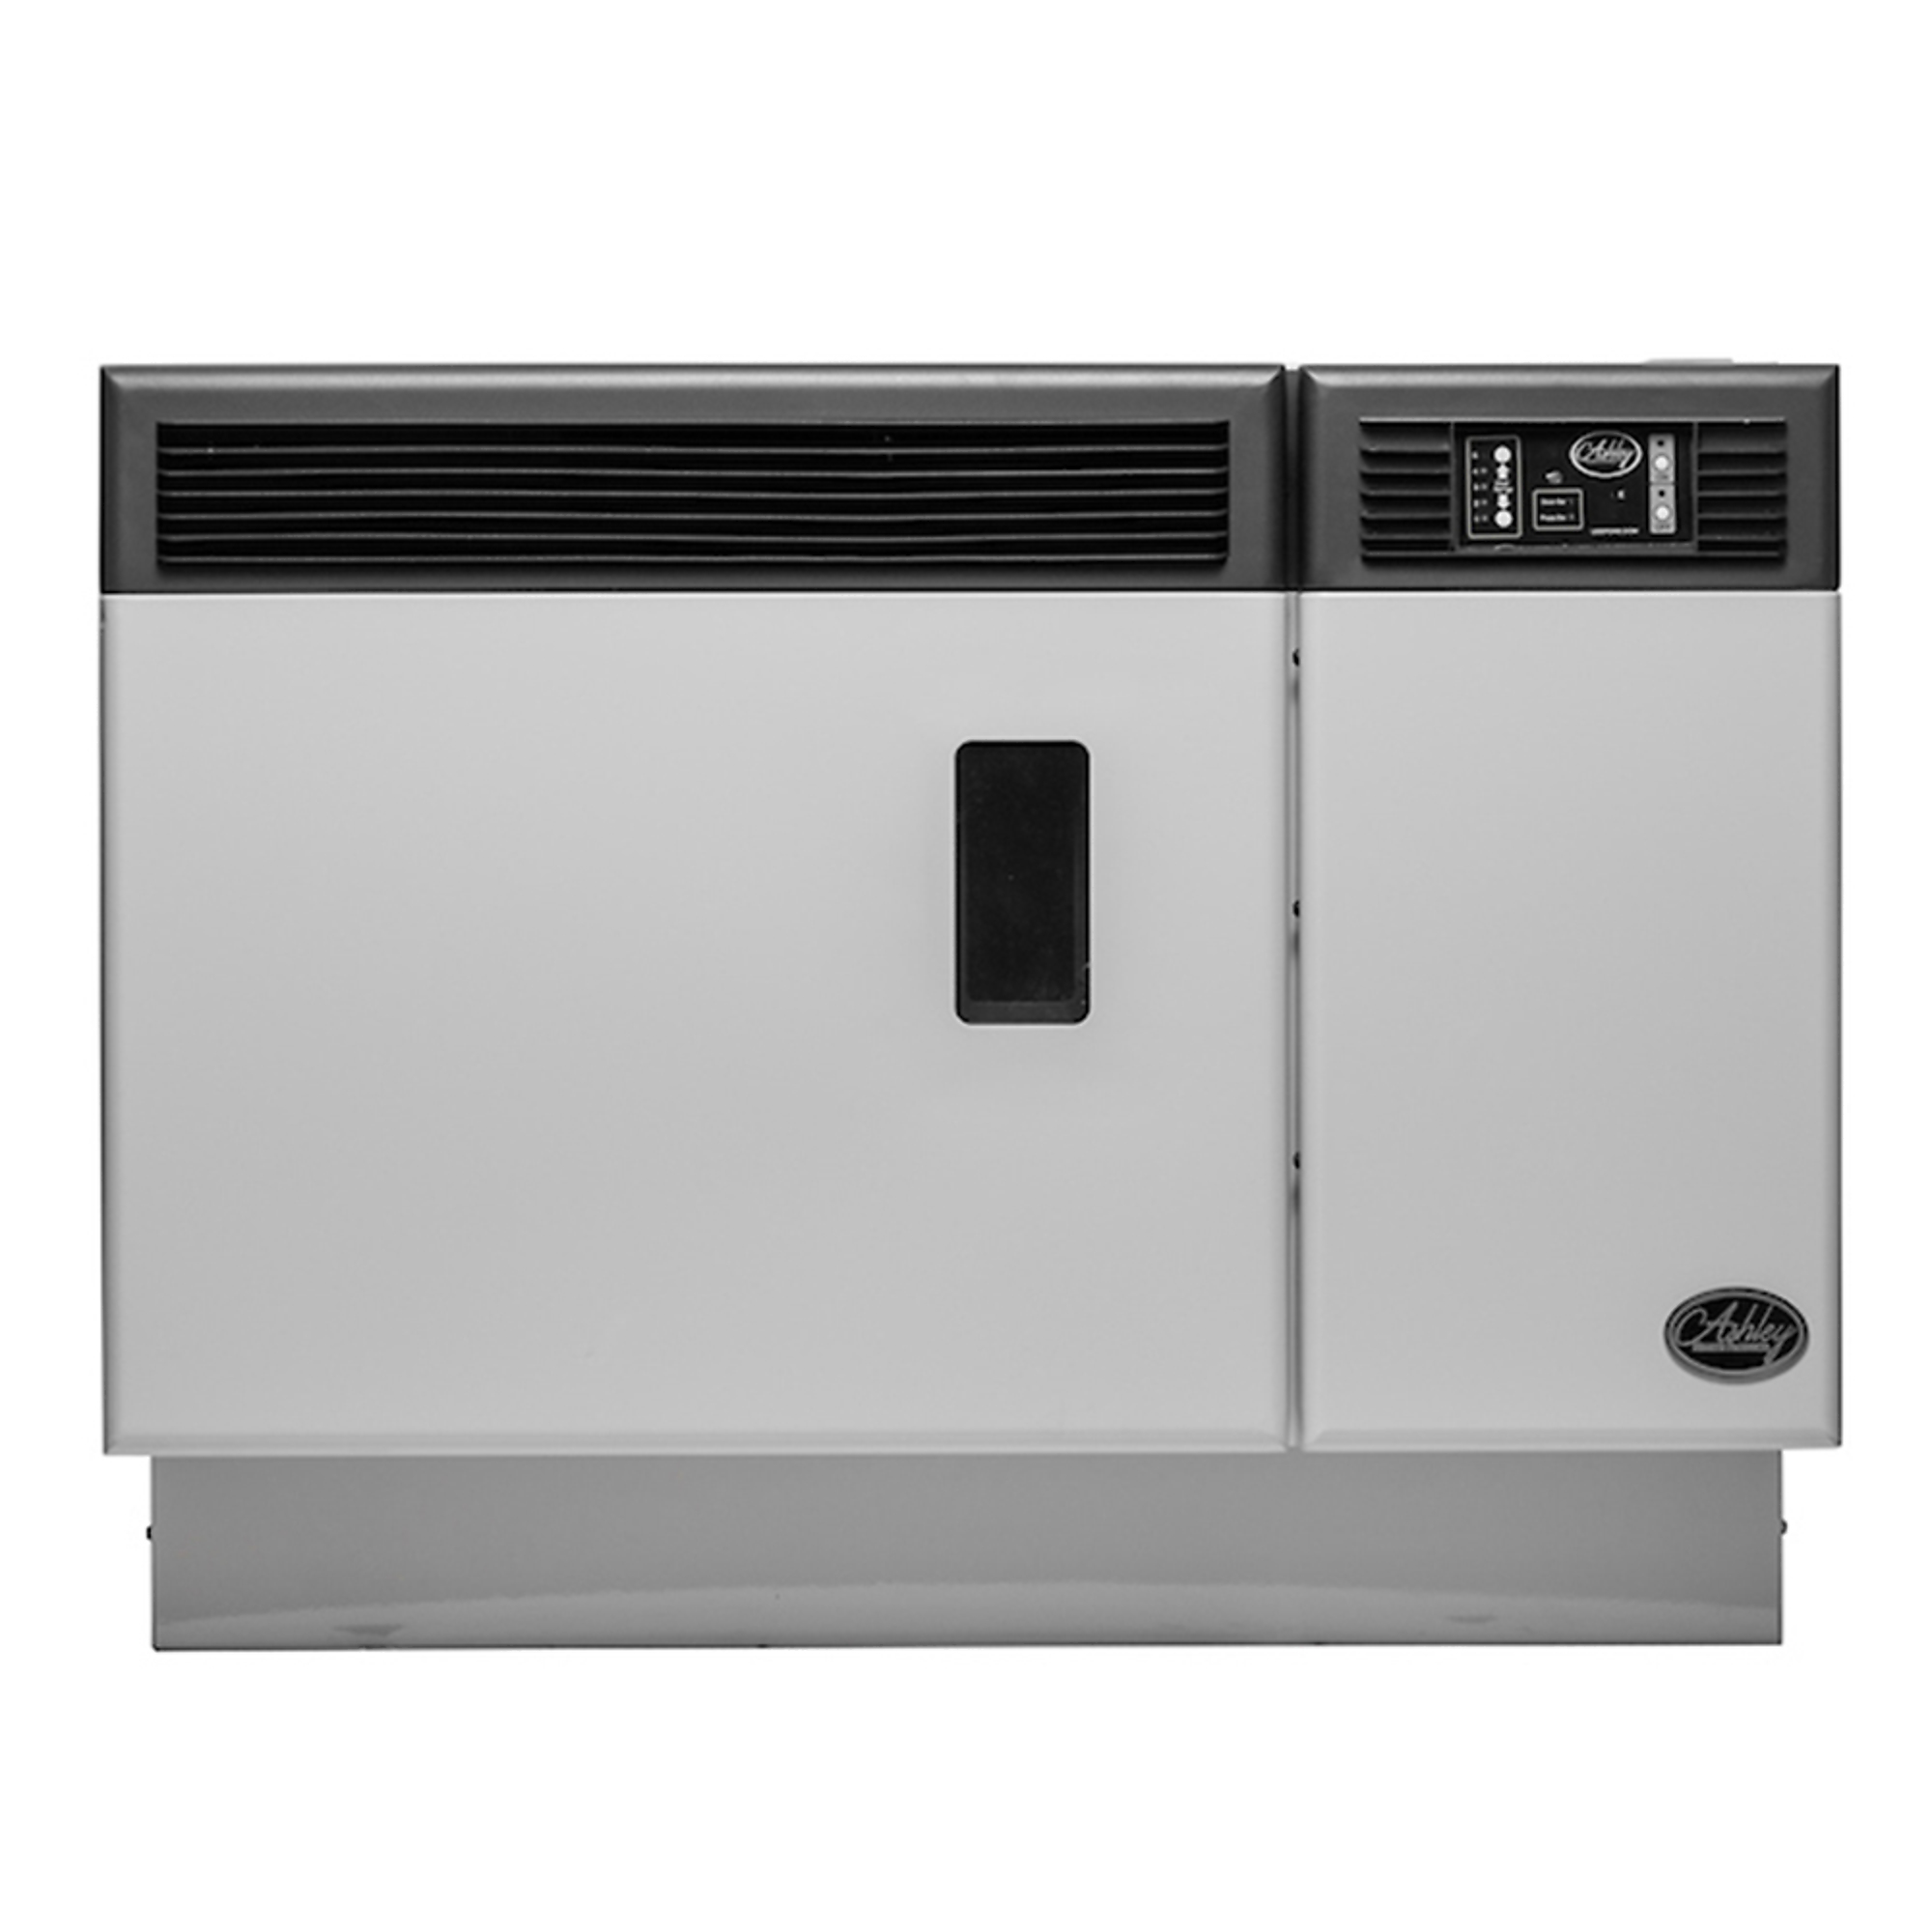 Ashley Hearth, 1000 Sq. Ft. Wall Mount Direct Vent Pellet Stove, Heat Output 24000 Btu/hour, Heating Capability 1000 ftÂ², Model AP5000